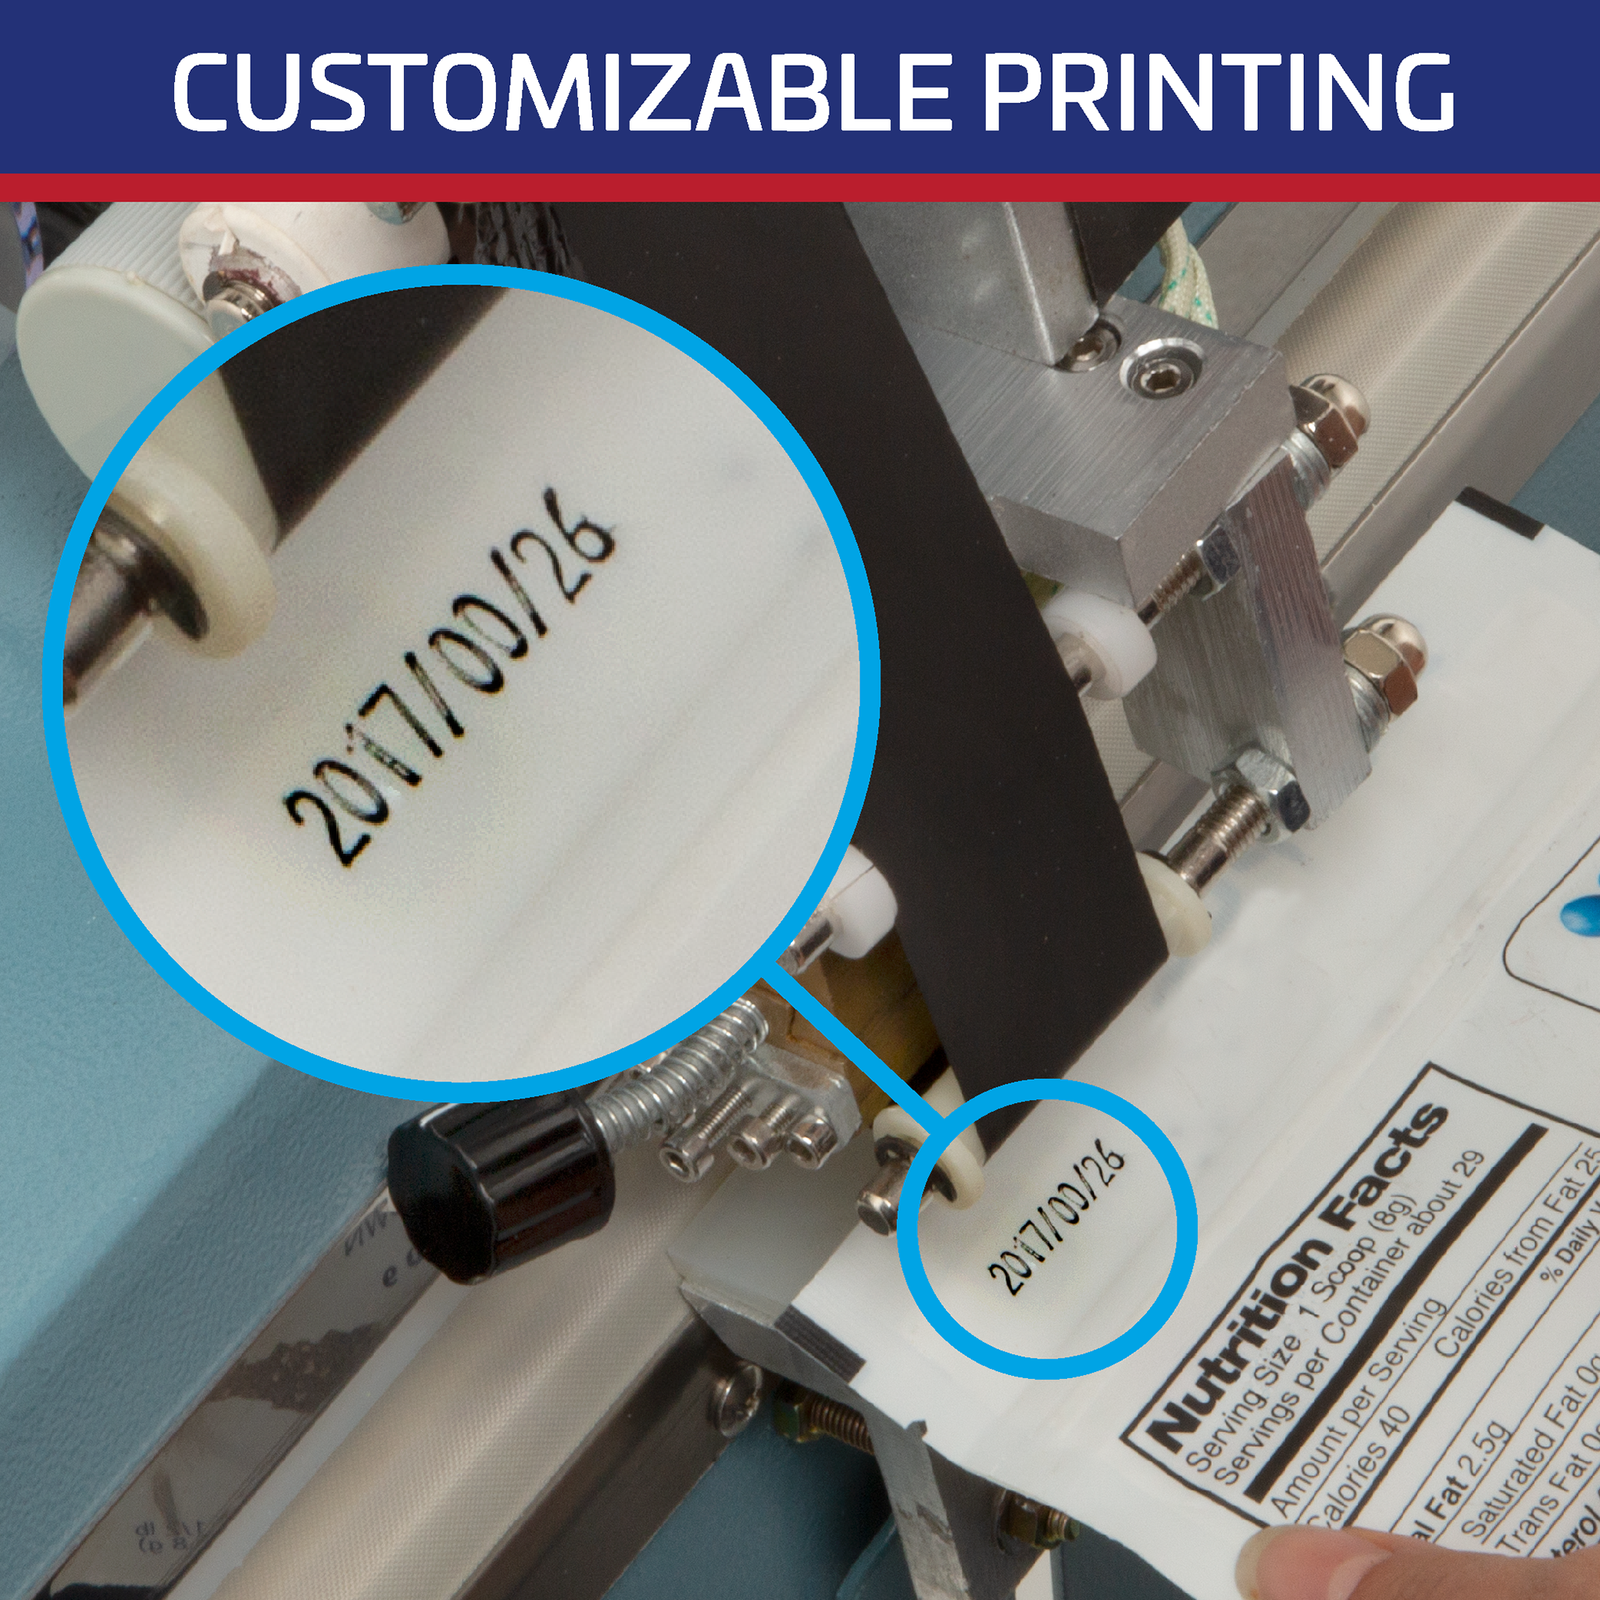 Titled reads: “customizable printing” Zoom showing the hot stamp coder printing the date on a white plastic bag.